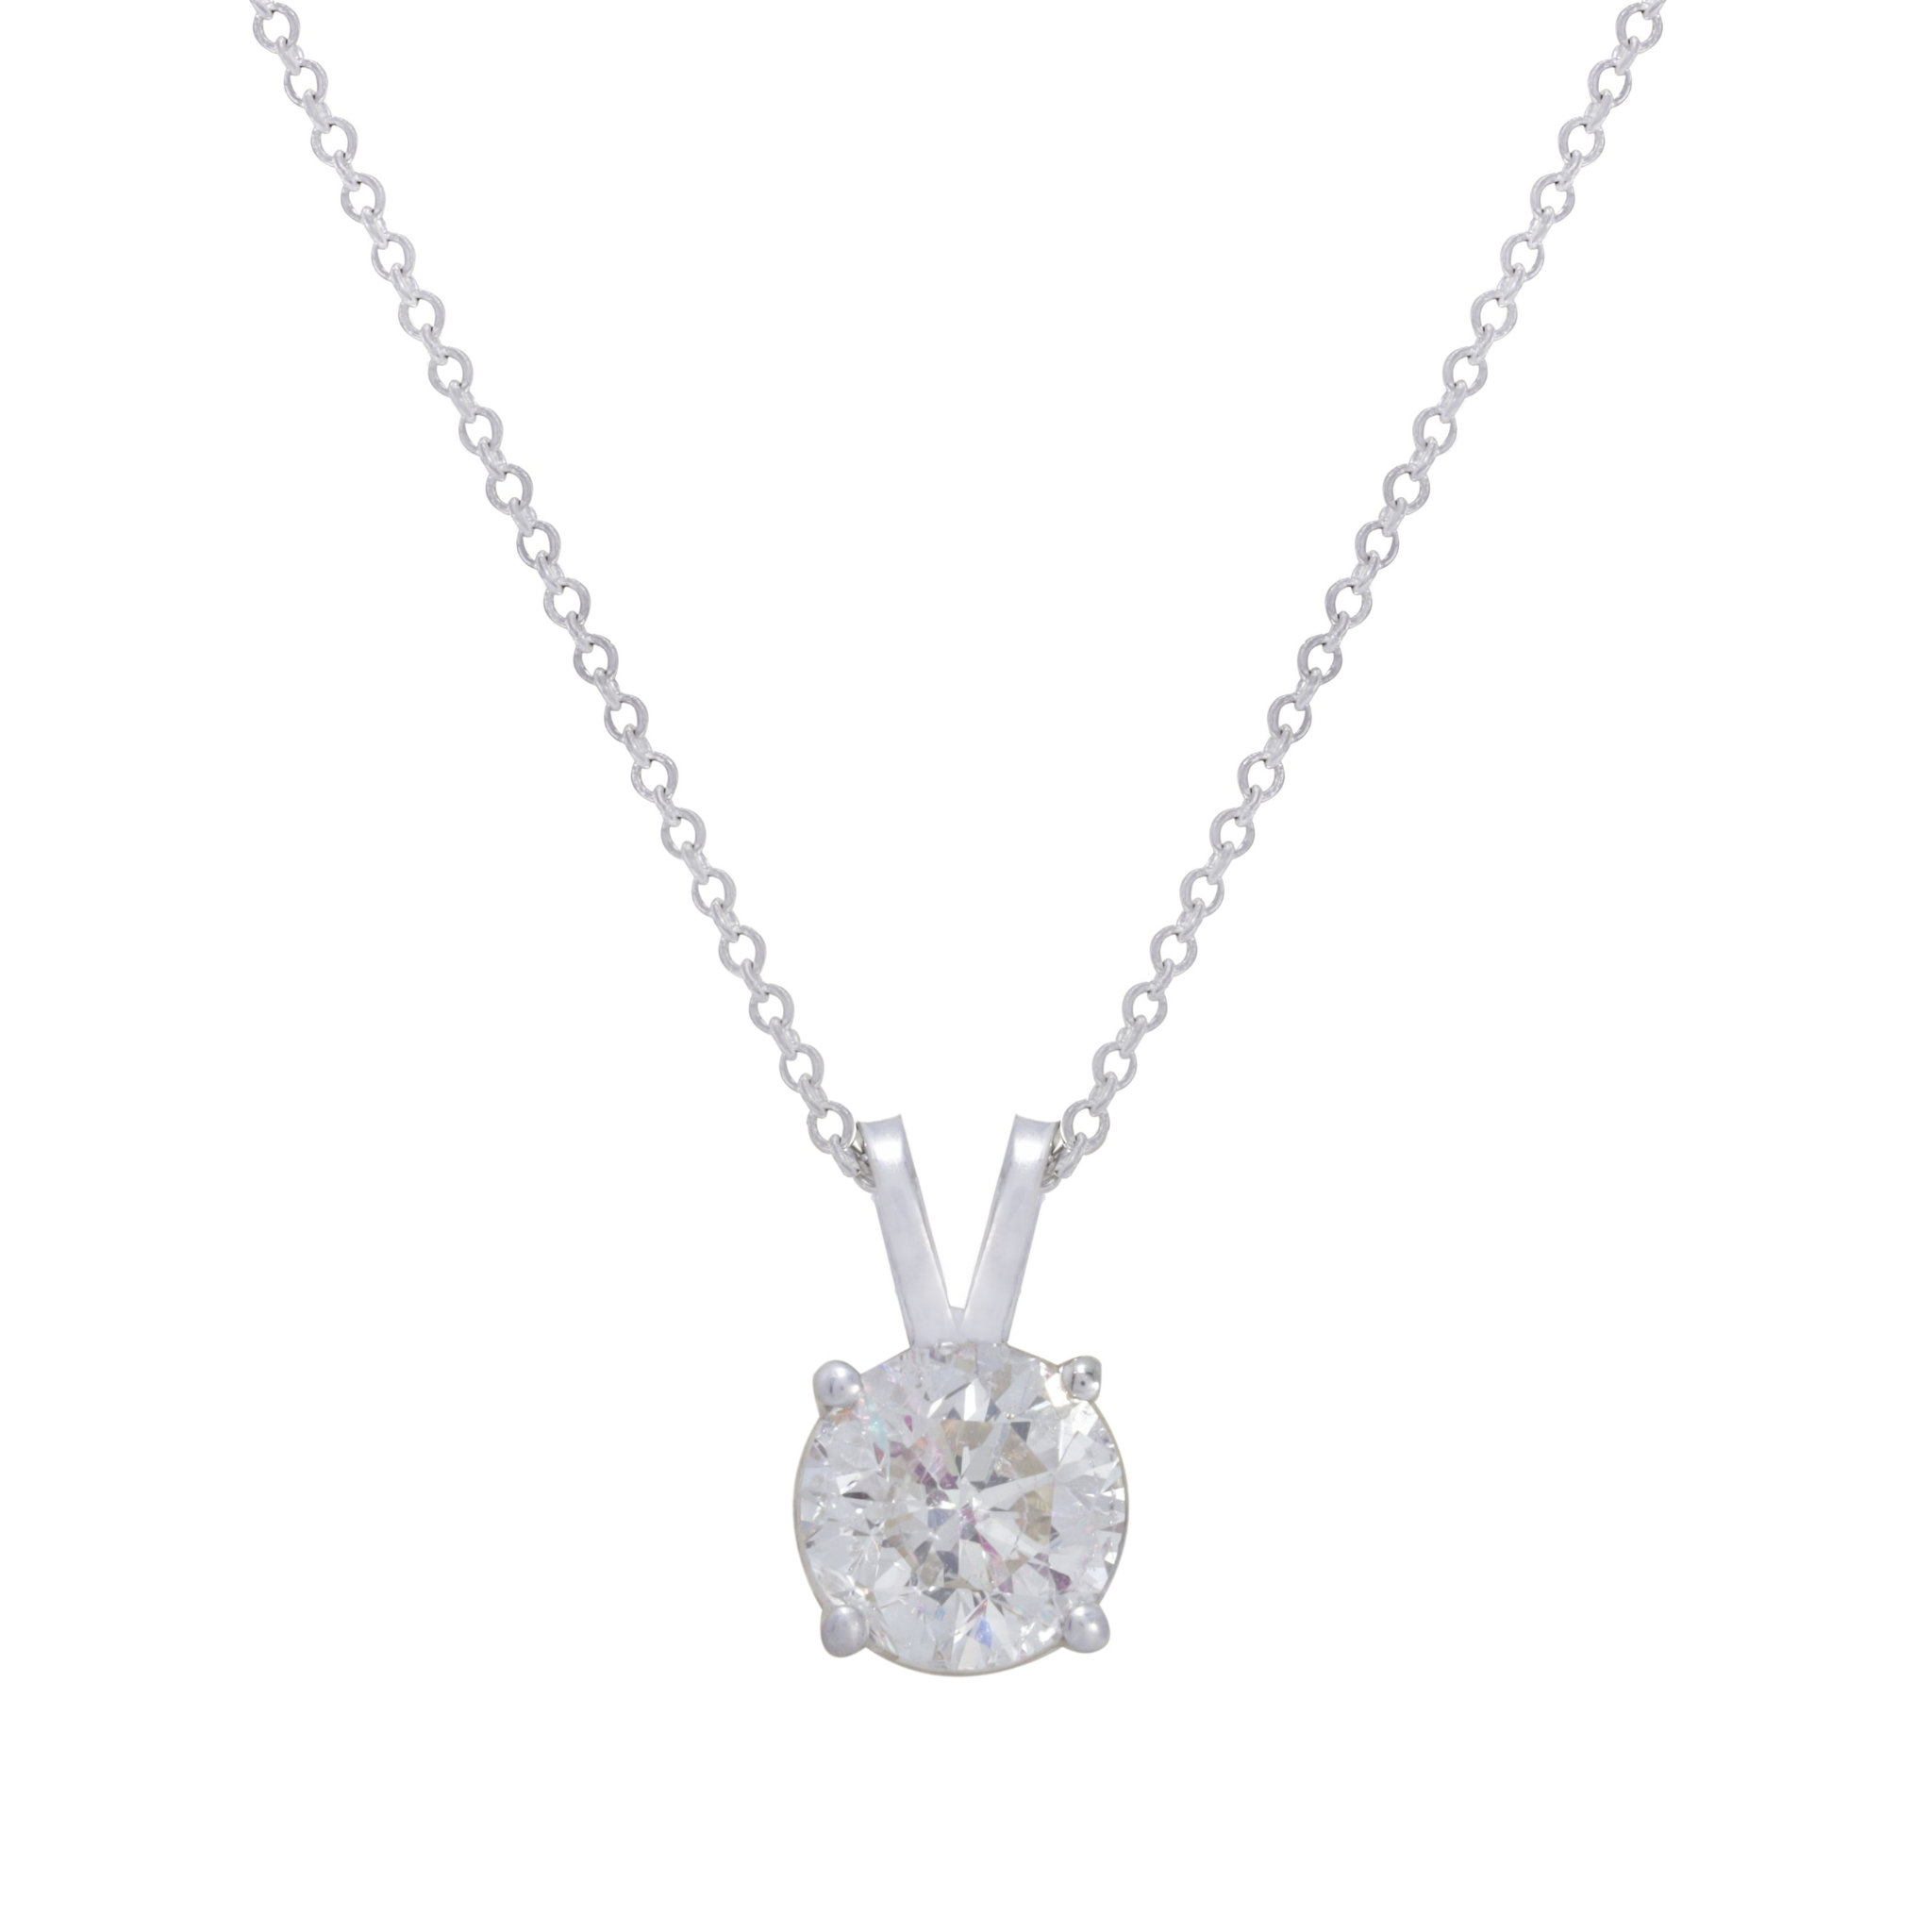 14kt White Gold Solitaire Diamond Pendant with 1.53 Cts.jpg